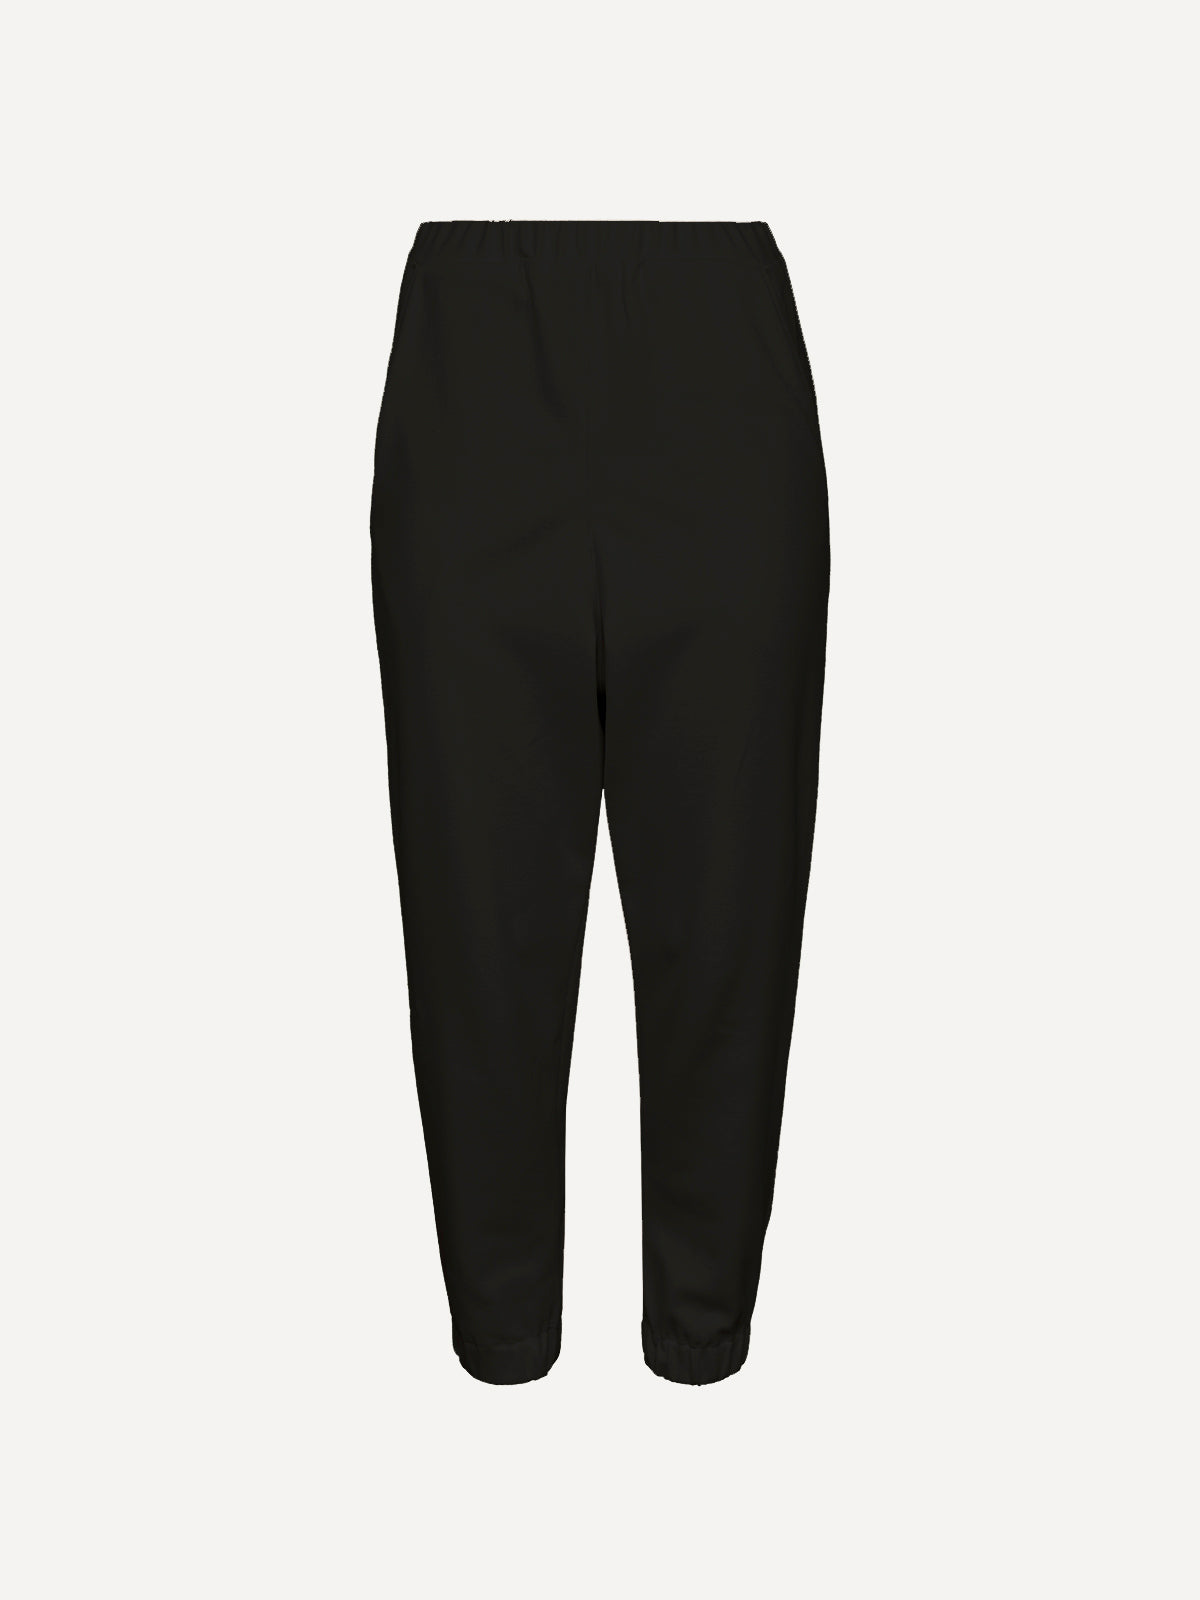 Black french terry rubber women's trousers